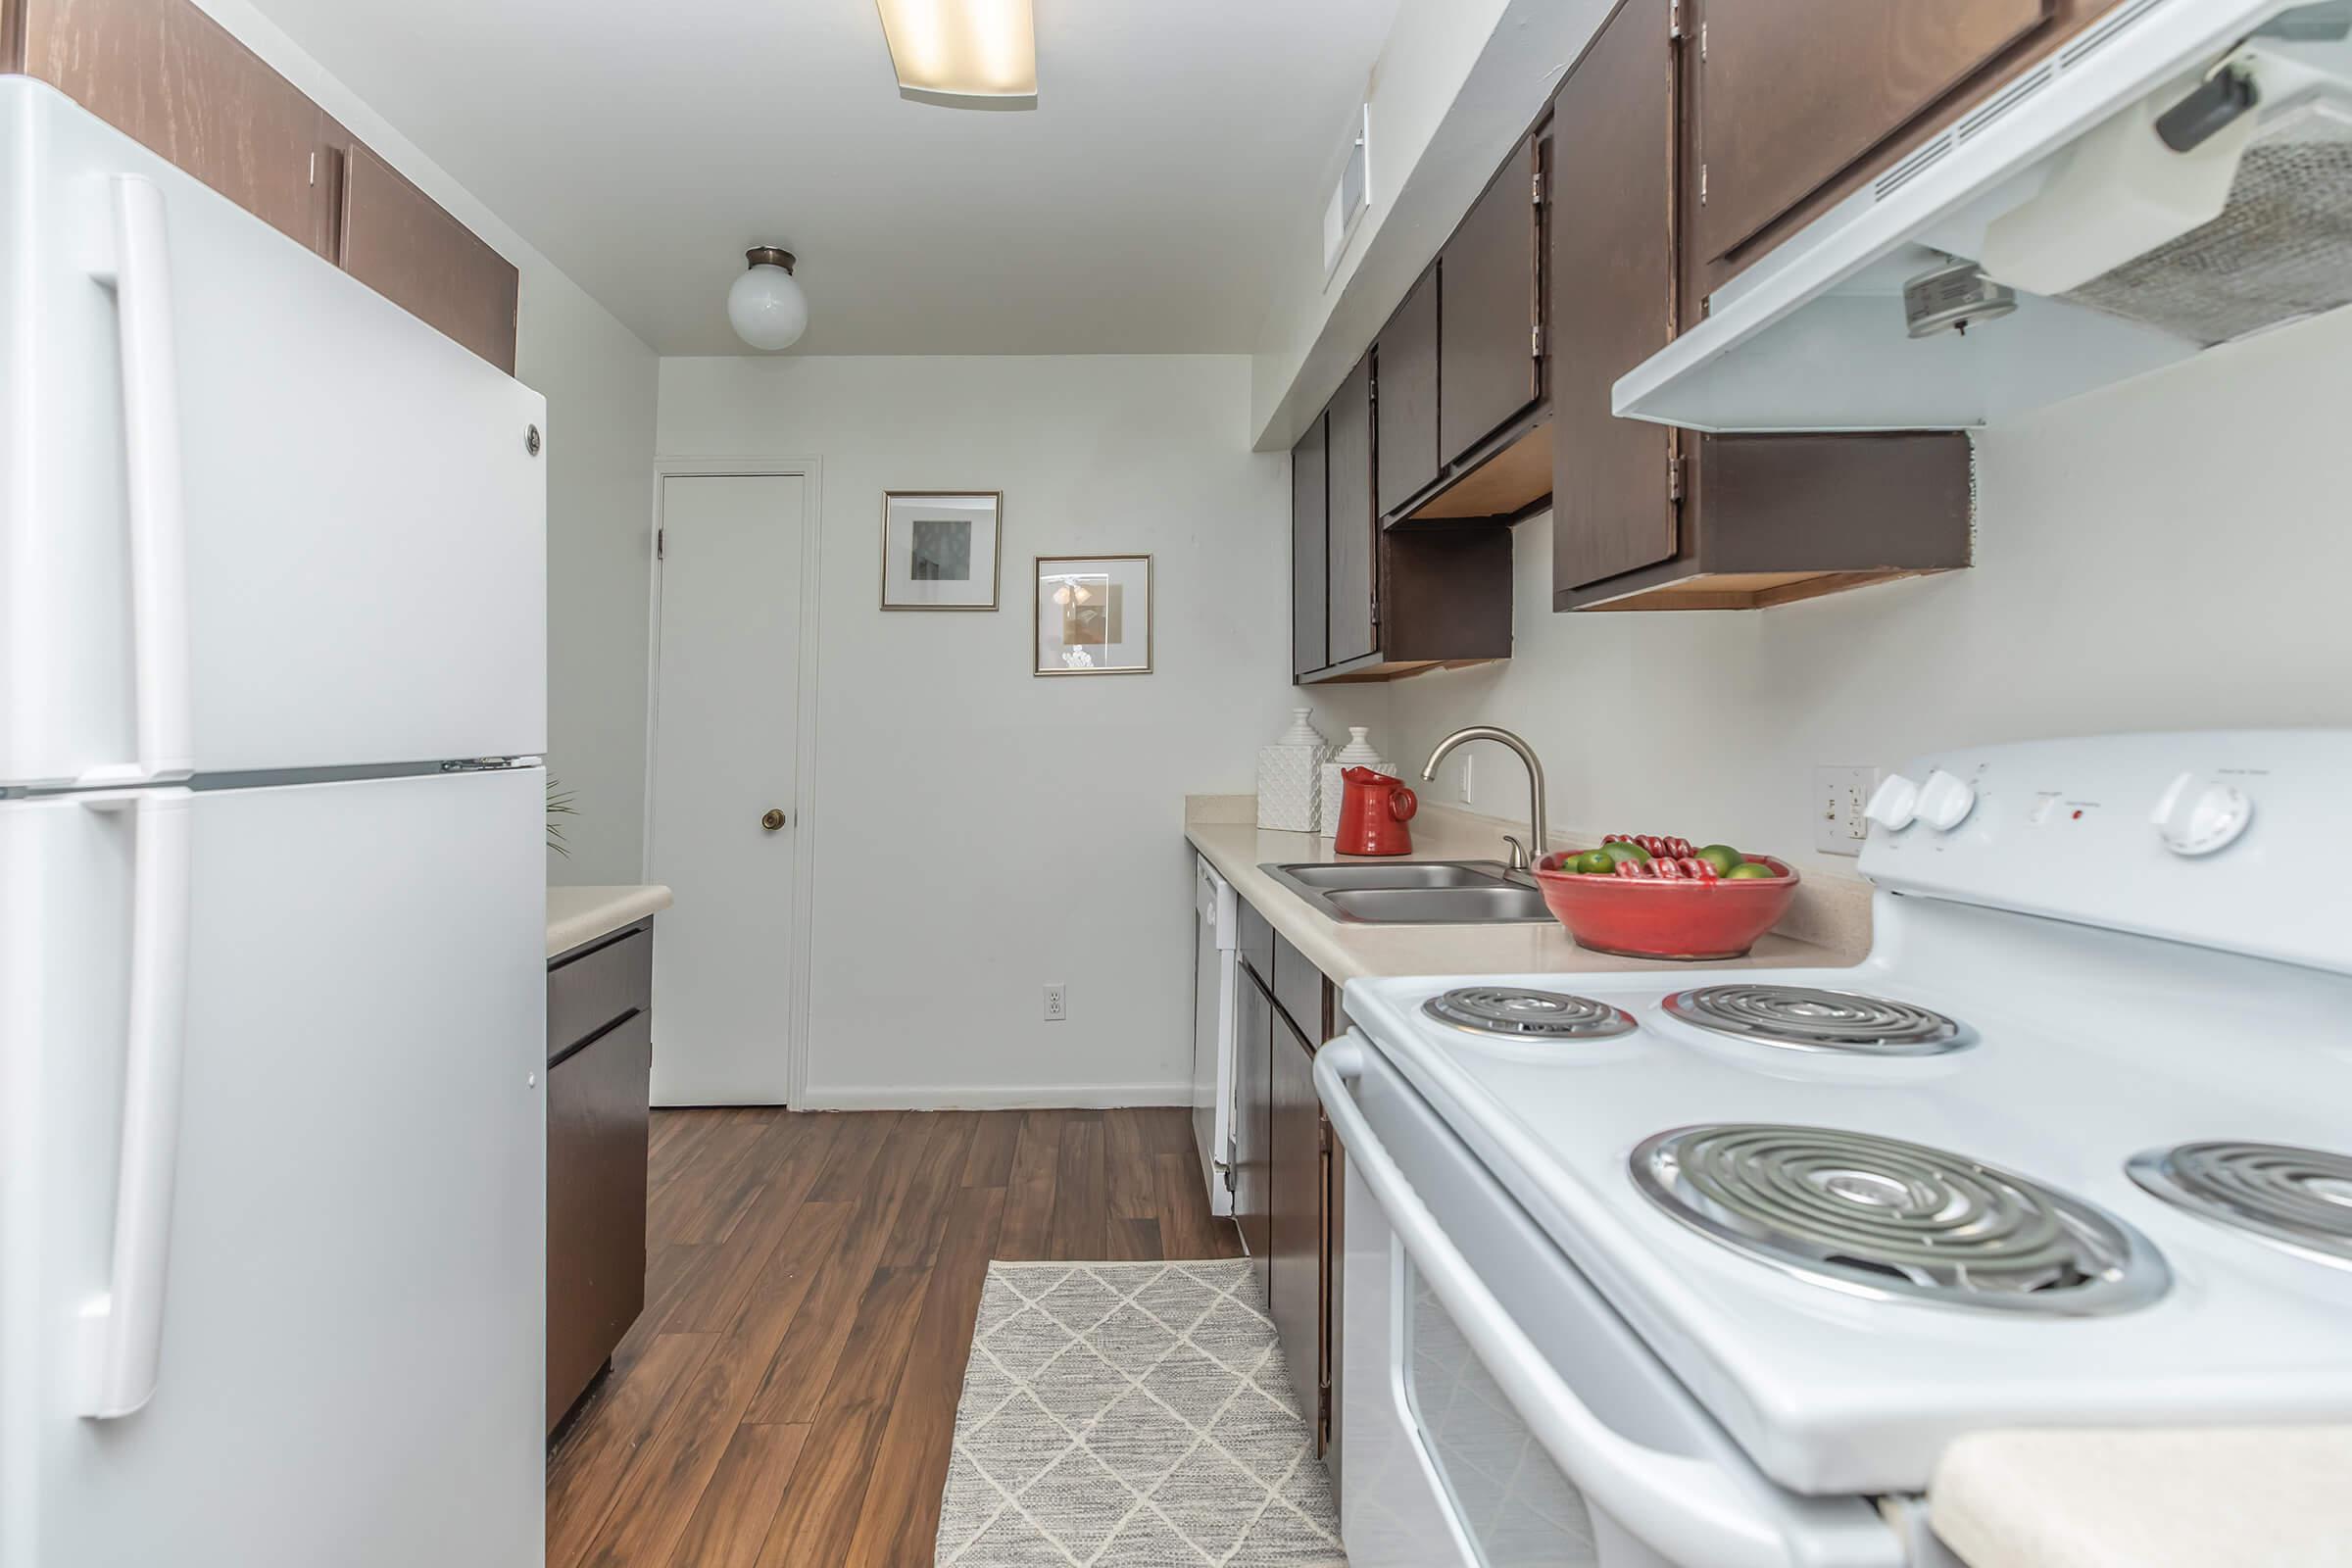 ALL-ELECTRIC KITCHENS AT PEAR TREE APARTMENTS